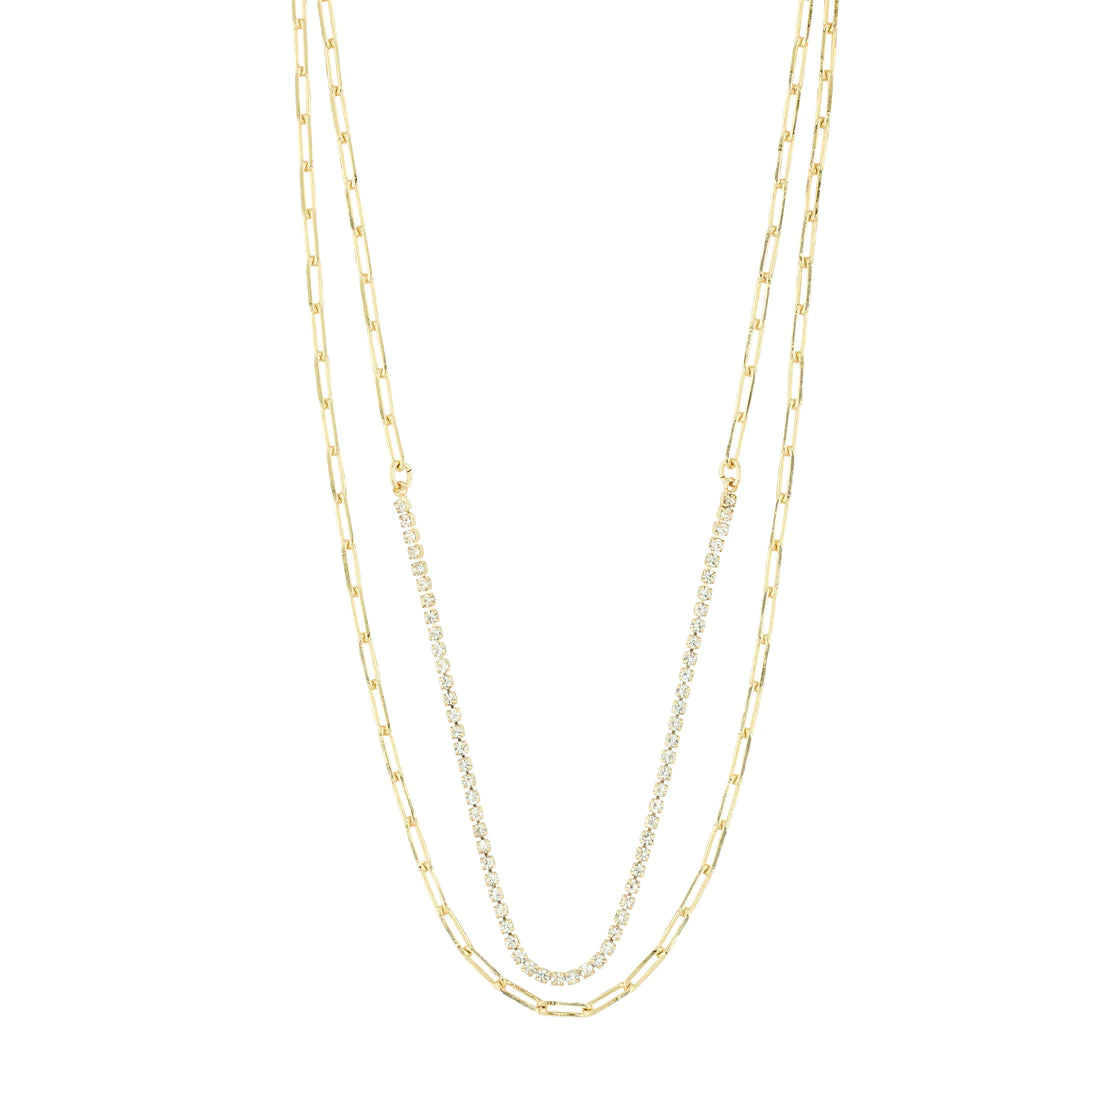 ROWAN RECYCLED NECKLACE, 2-IN-1, GOLD PLATED